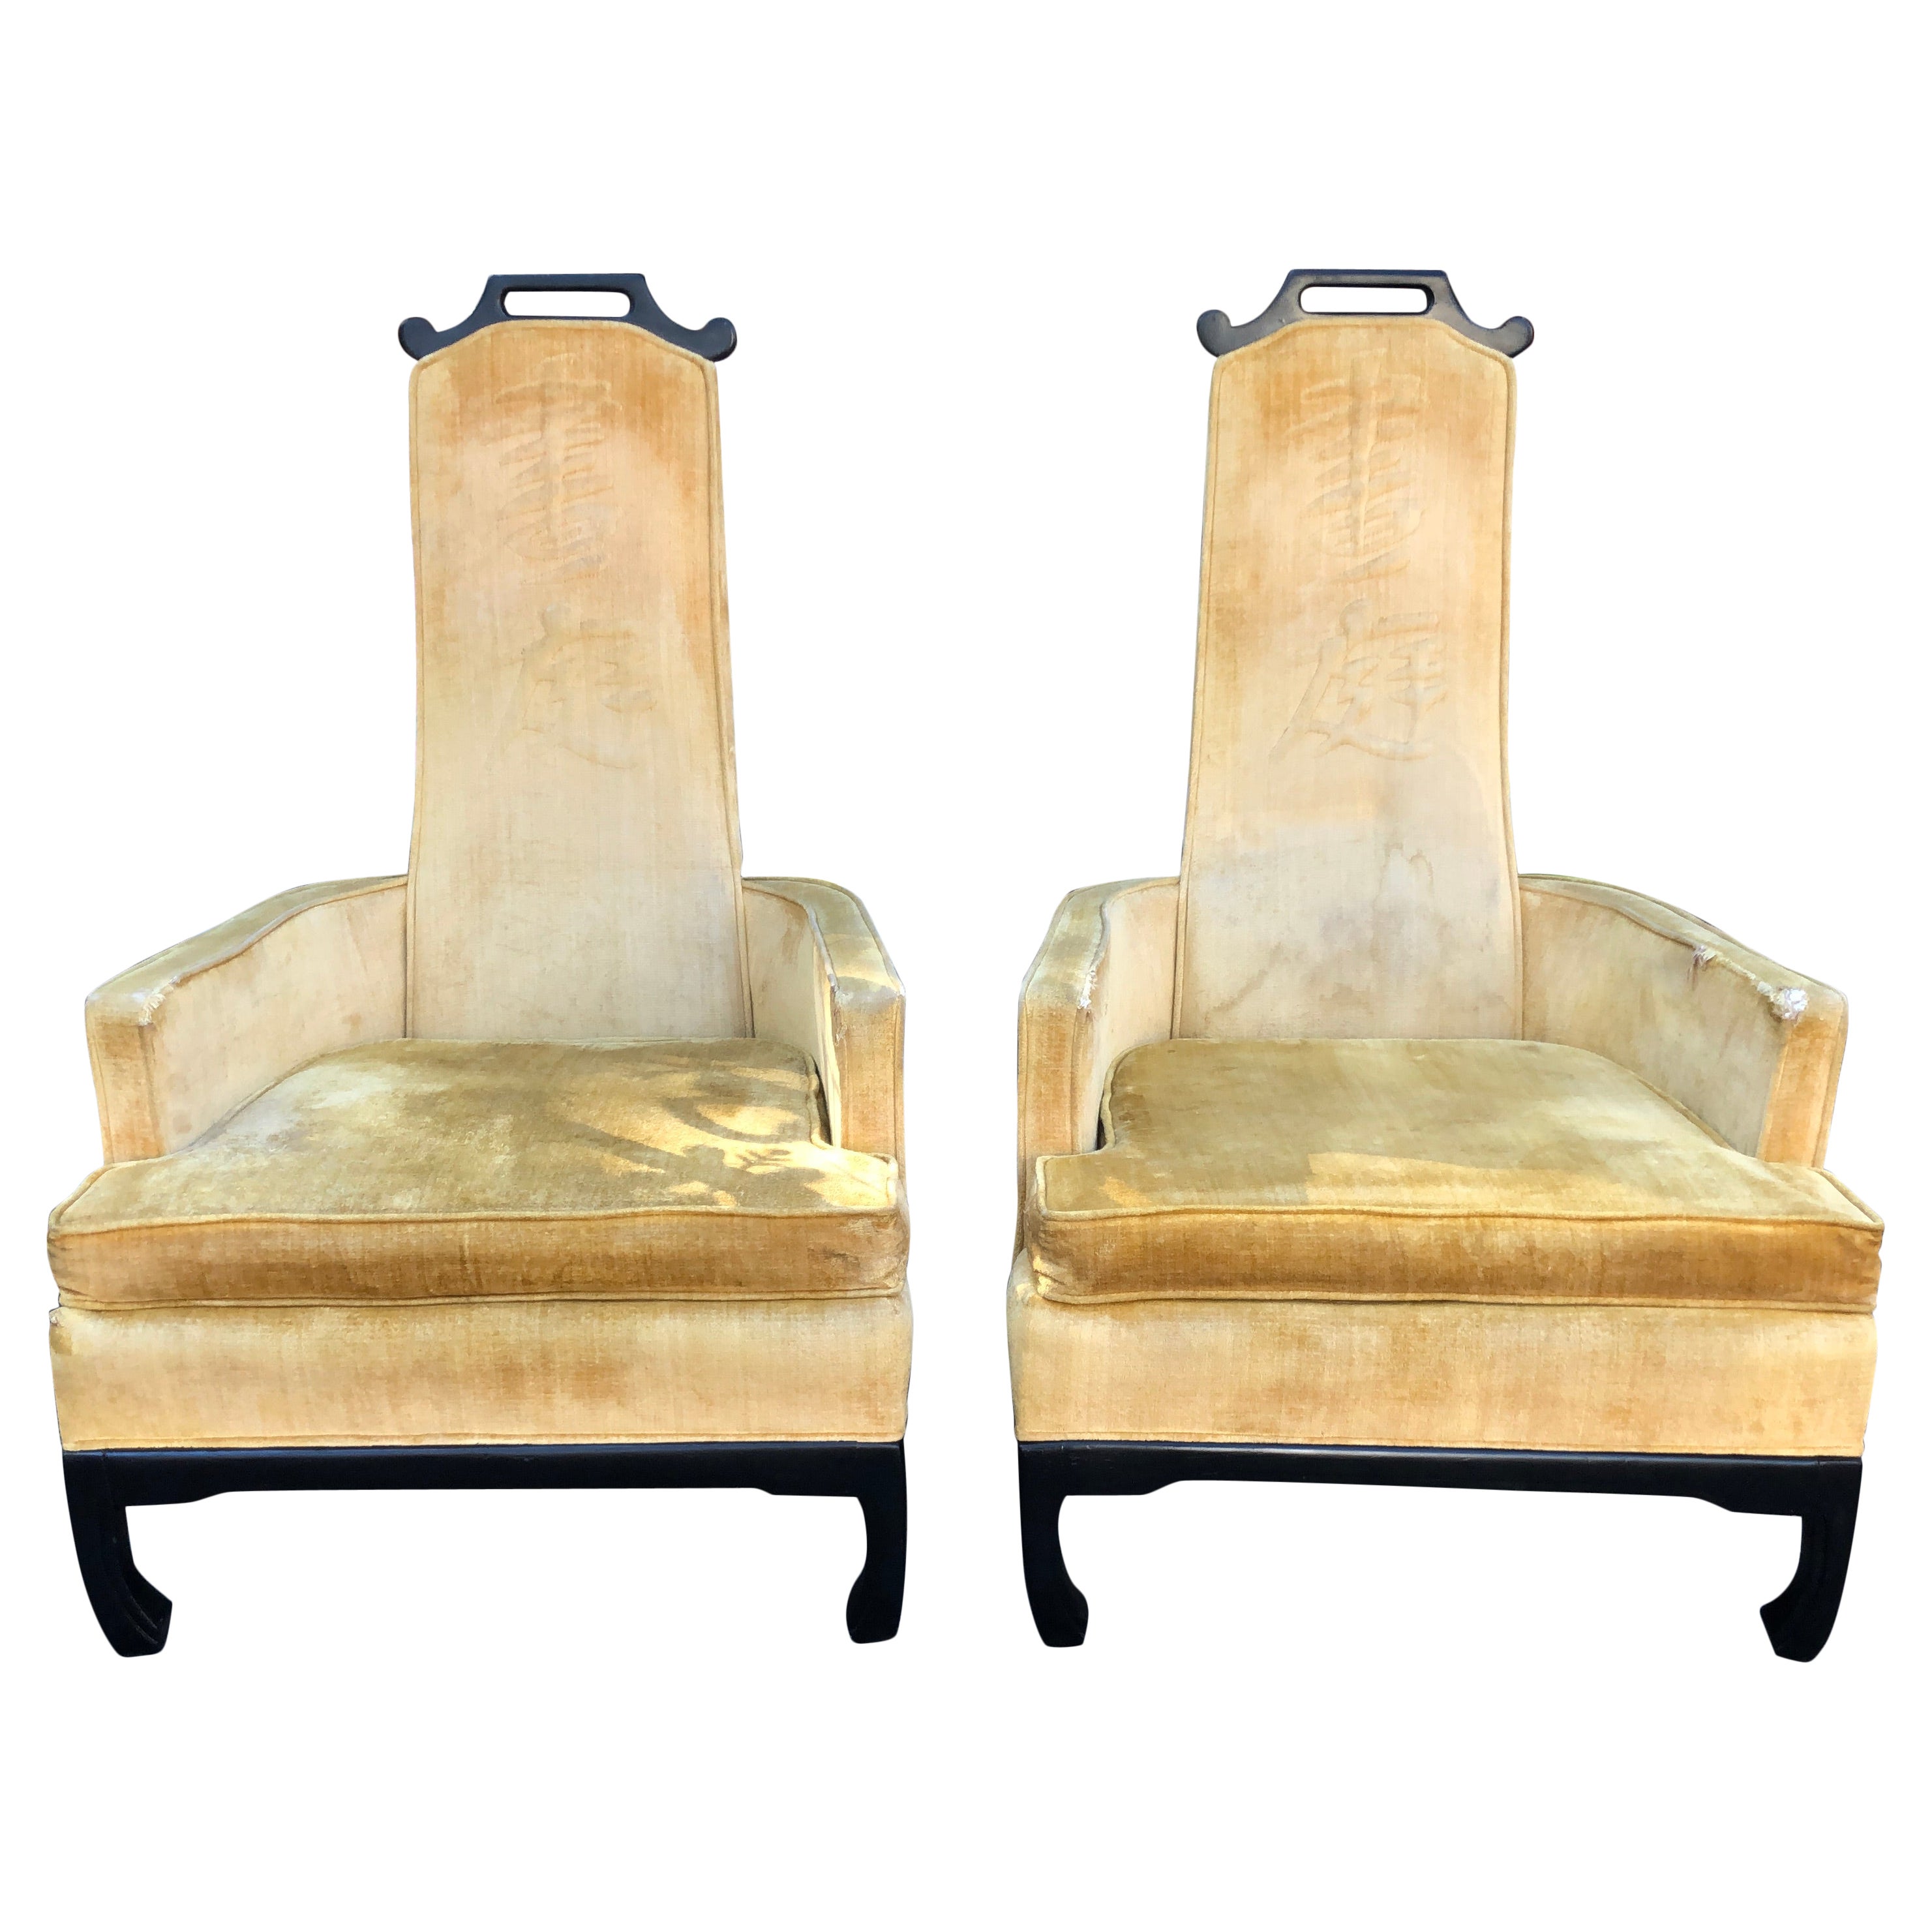 Stylish Pair Chinese Style Chairs Norman Fox MacGregor Hollywood Regency For Sale